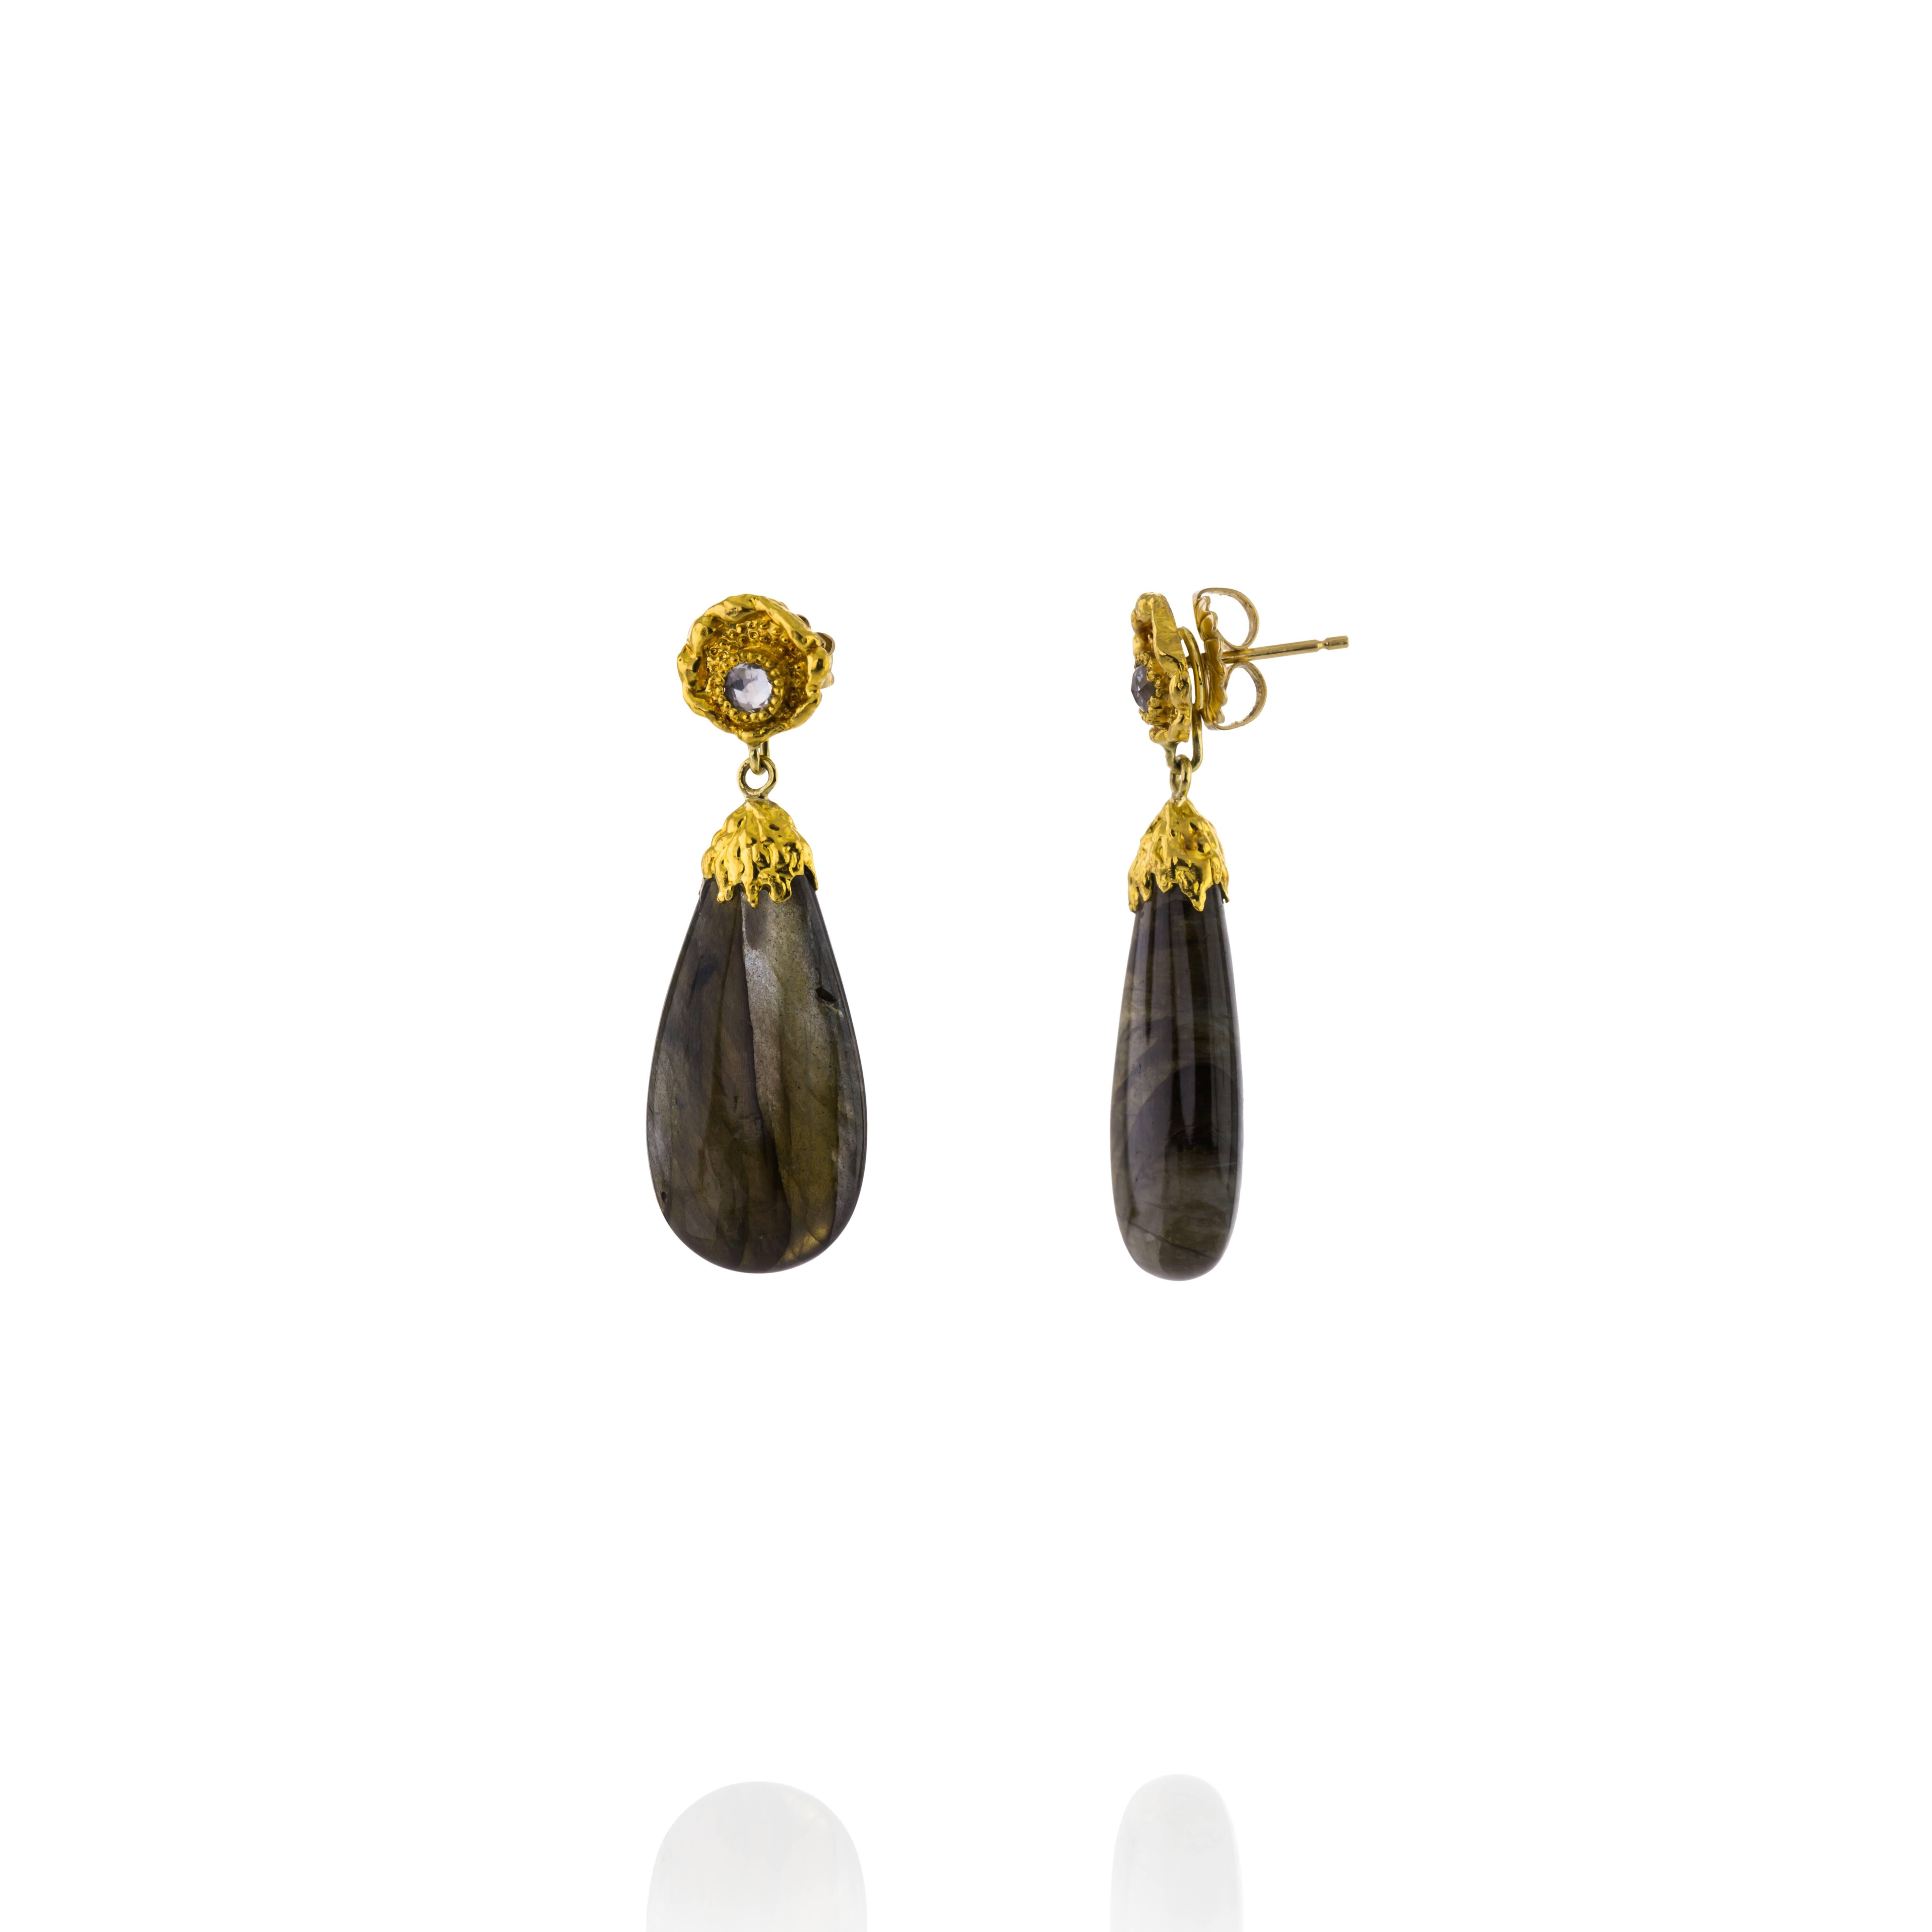 Earrings designed and made in the USA by inspired designer Victor Velyan.  The earrings are made of a base of Sterling Silver, with 24K Gold Accents.  54.62 CT Labradorite Drops complete the look. The tops also have White Zircon Stones.  